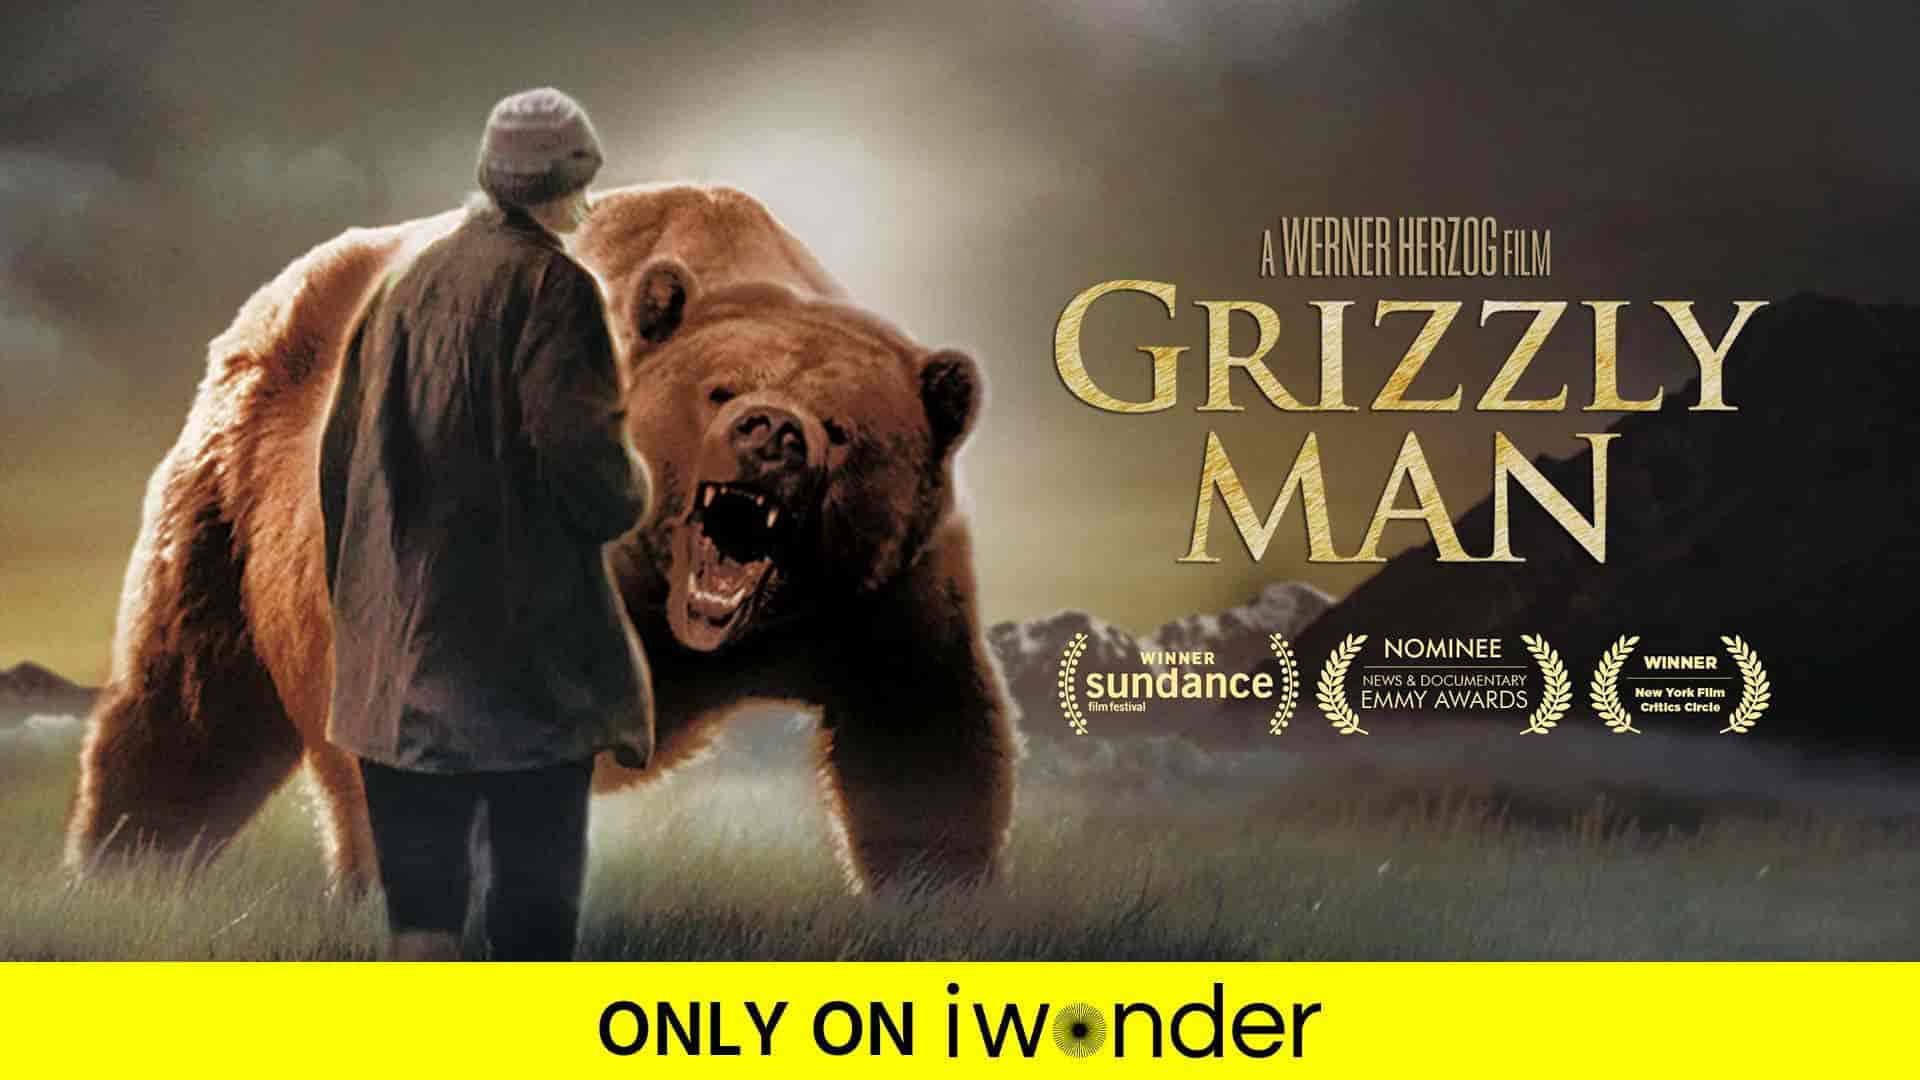 Grizzly Man: Werner Herzog's masterpiece now on iwonder exclusively